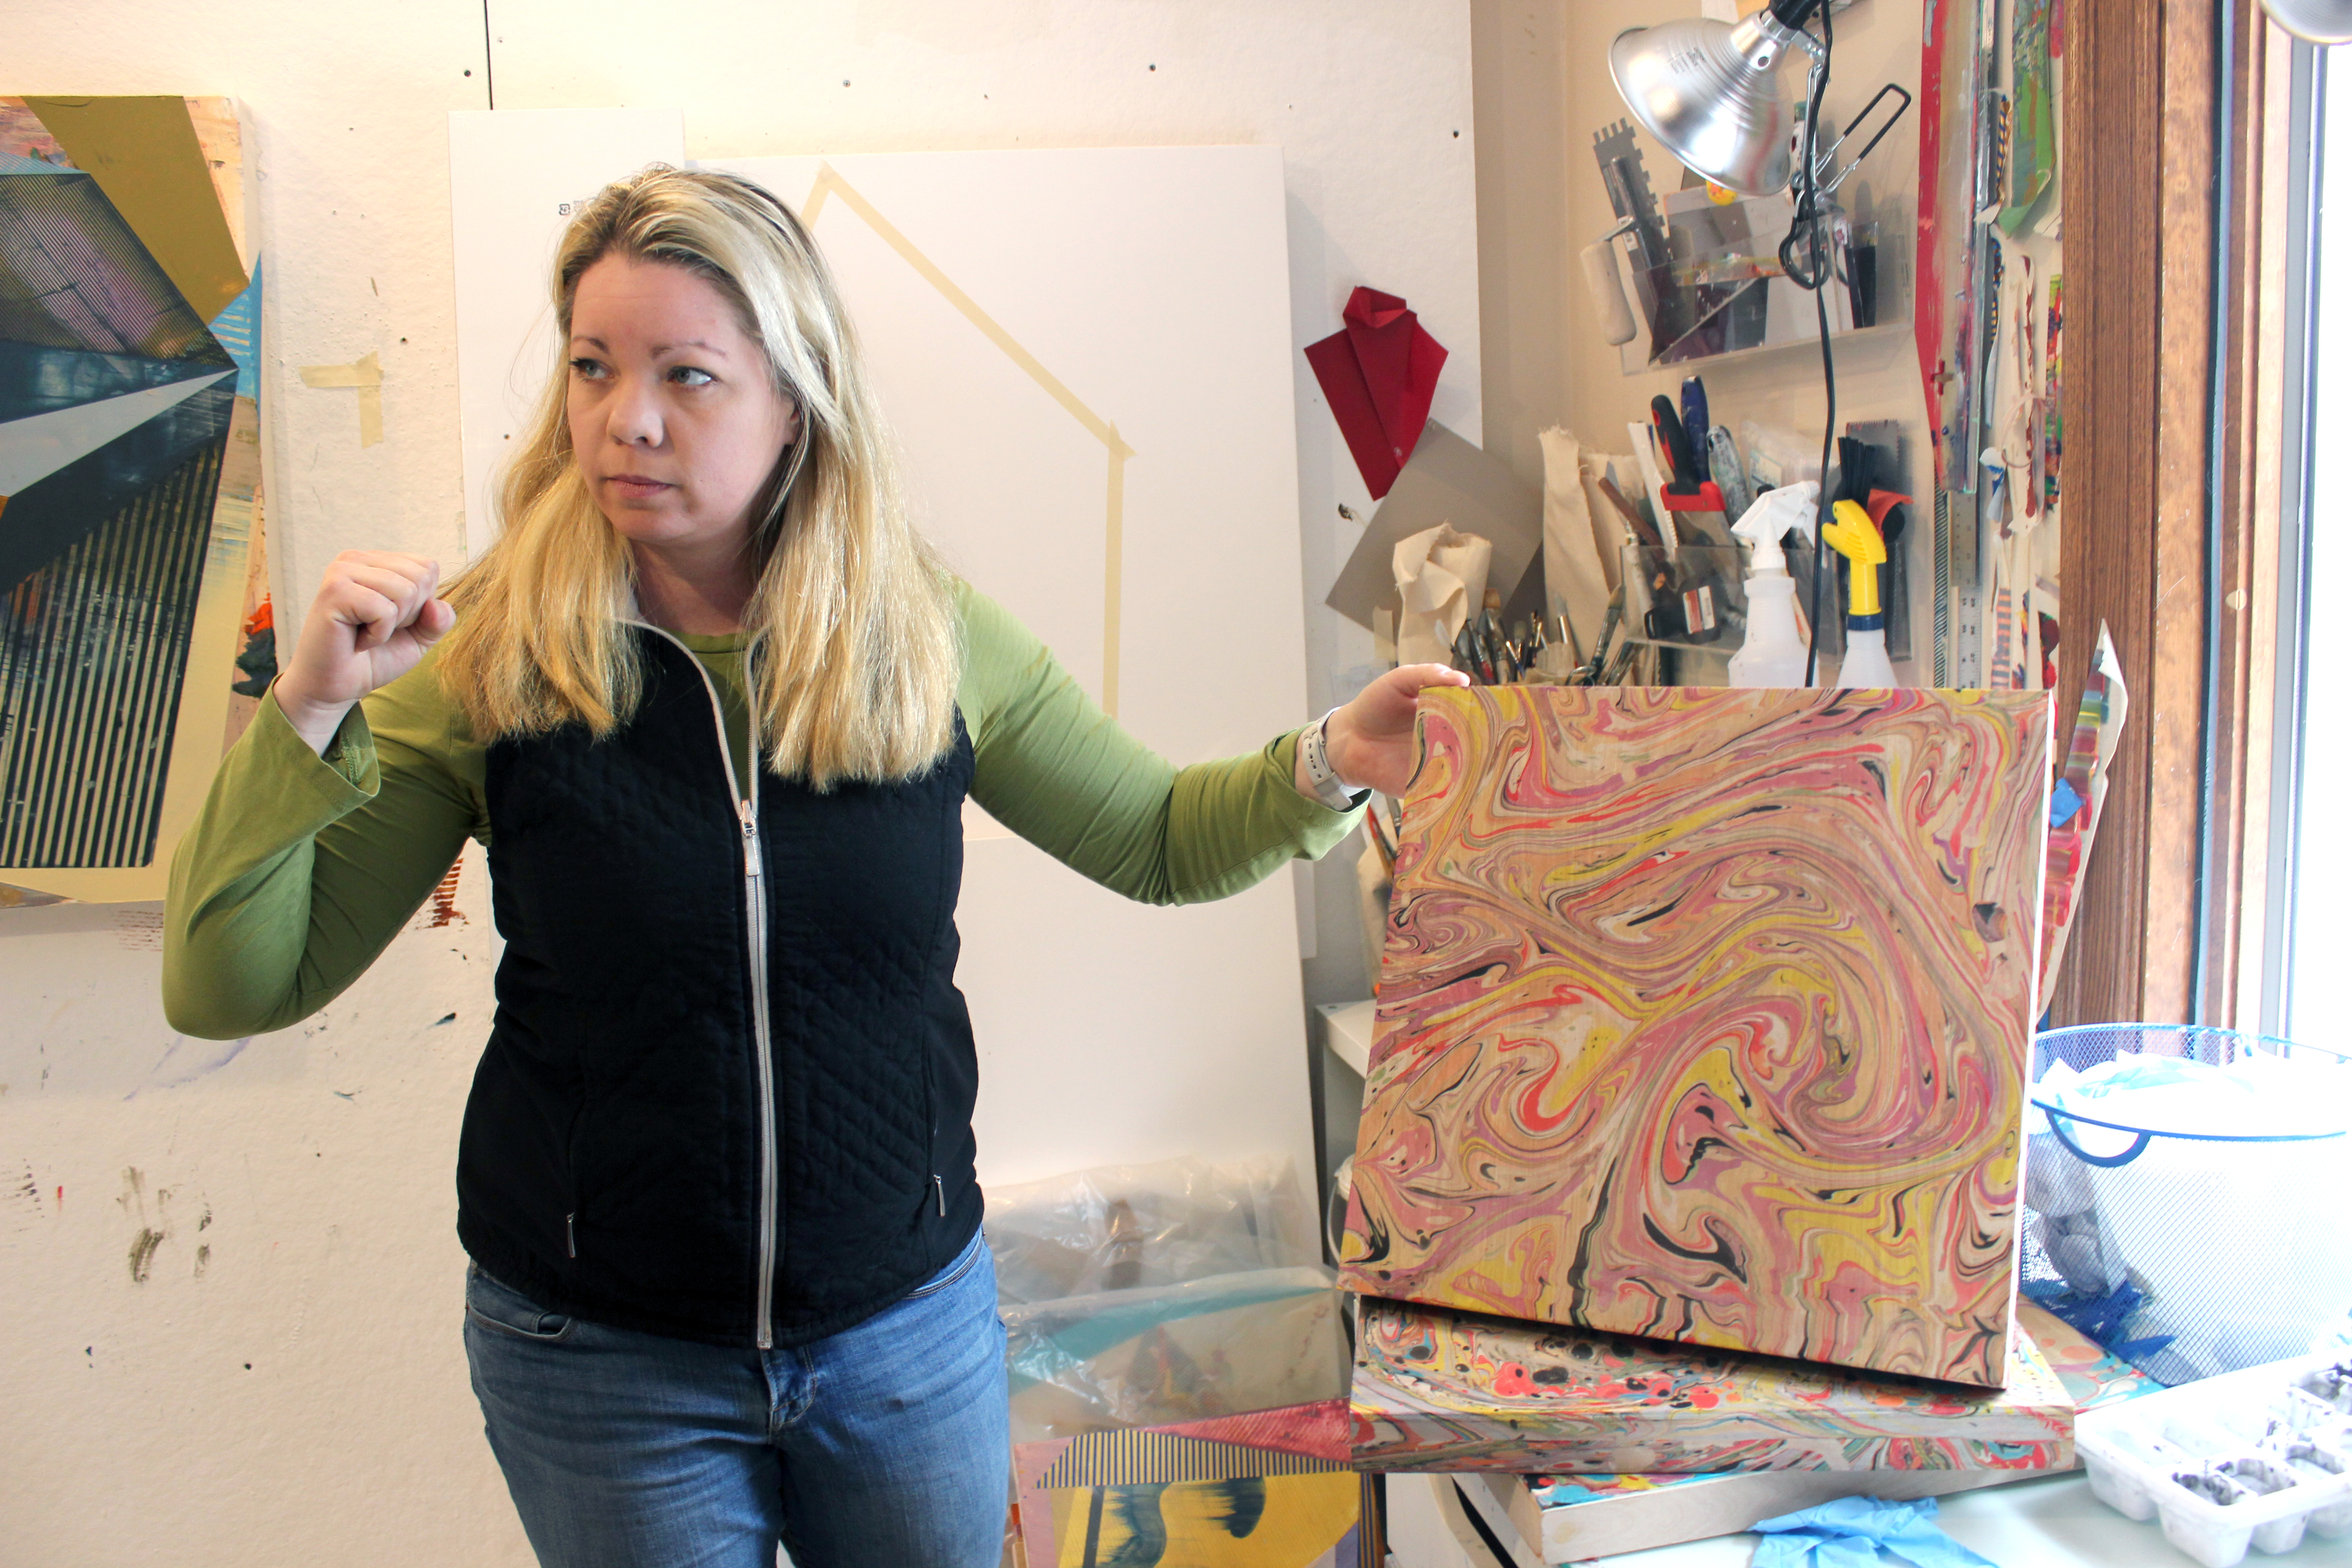 Jenniffer Omaitz discusses her marbling – a creative endeavor she undertakes in her spare time – while in her studio in Kent.